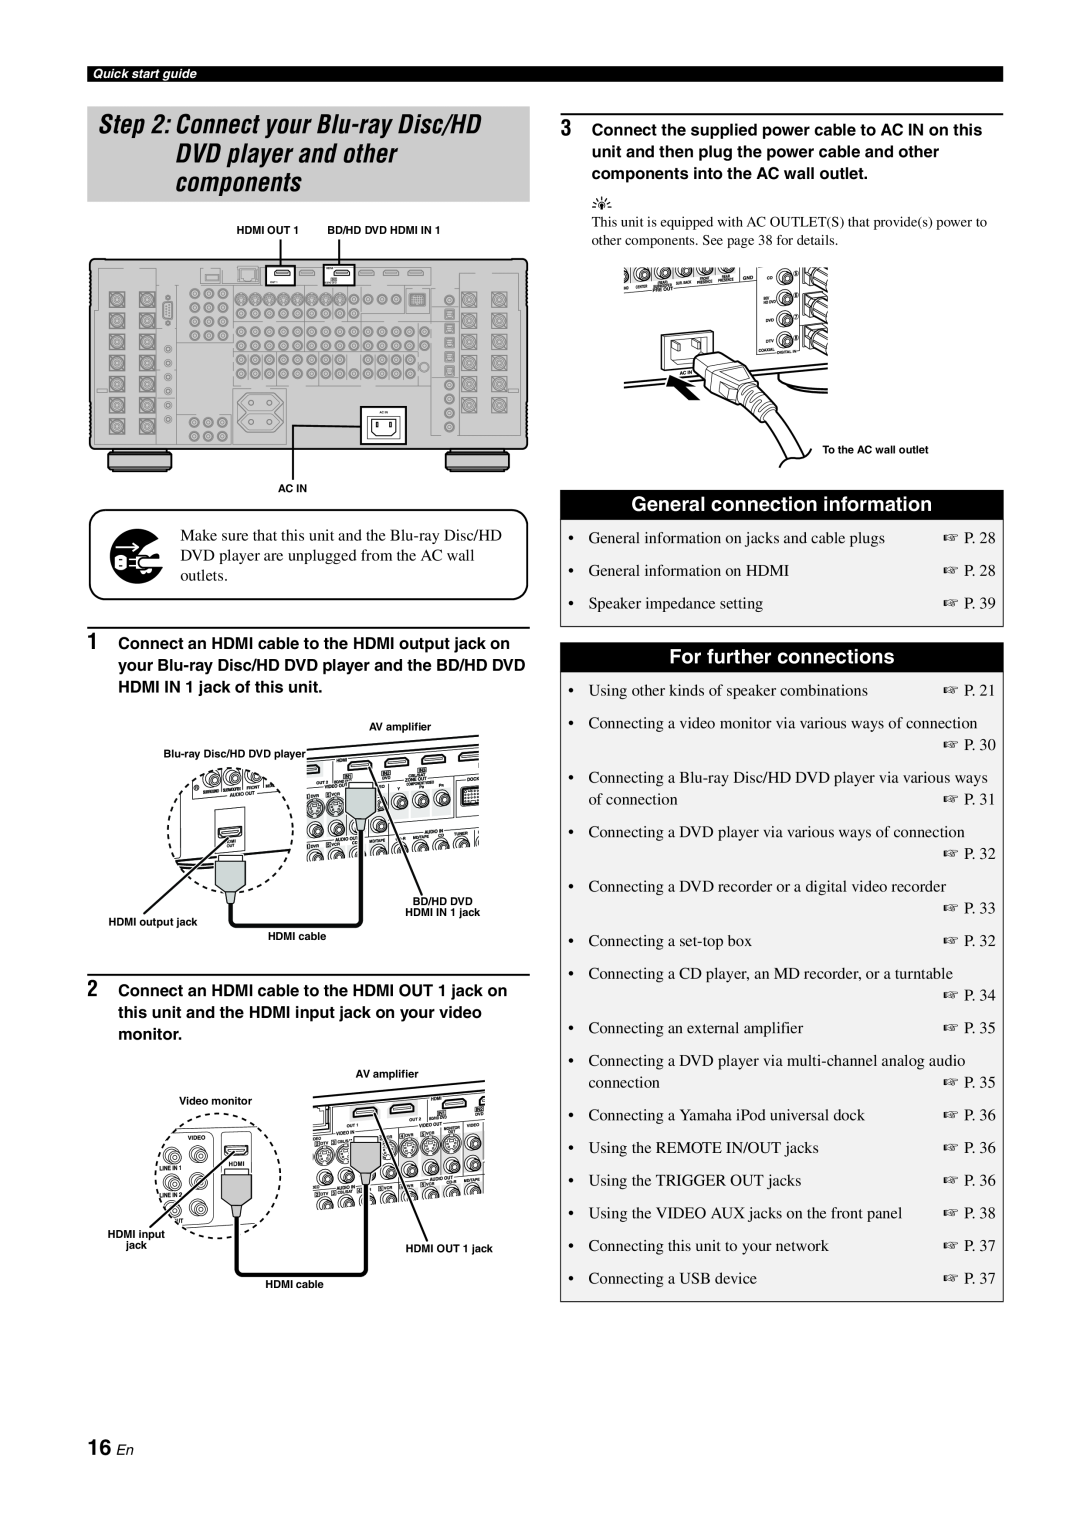 Yamaha DSP-Z11 owner manual 16 En, General connection information, For further connections 